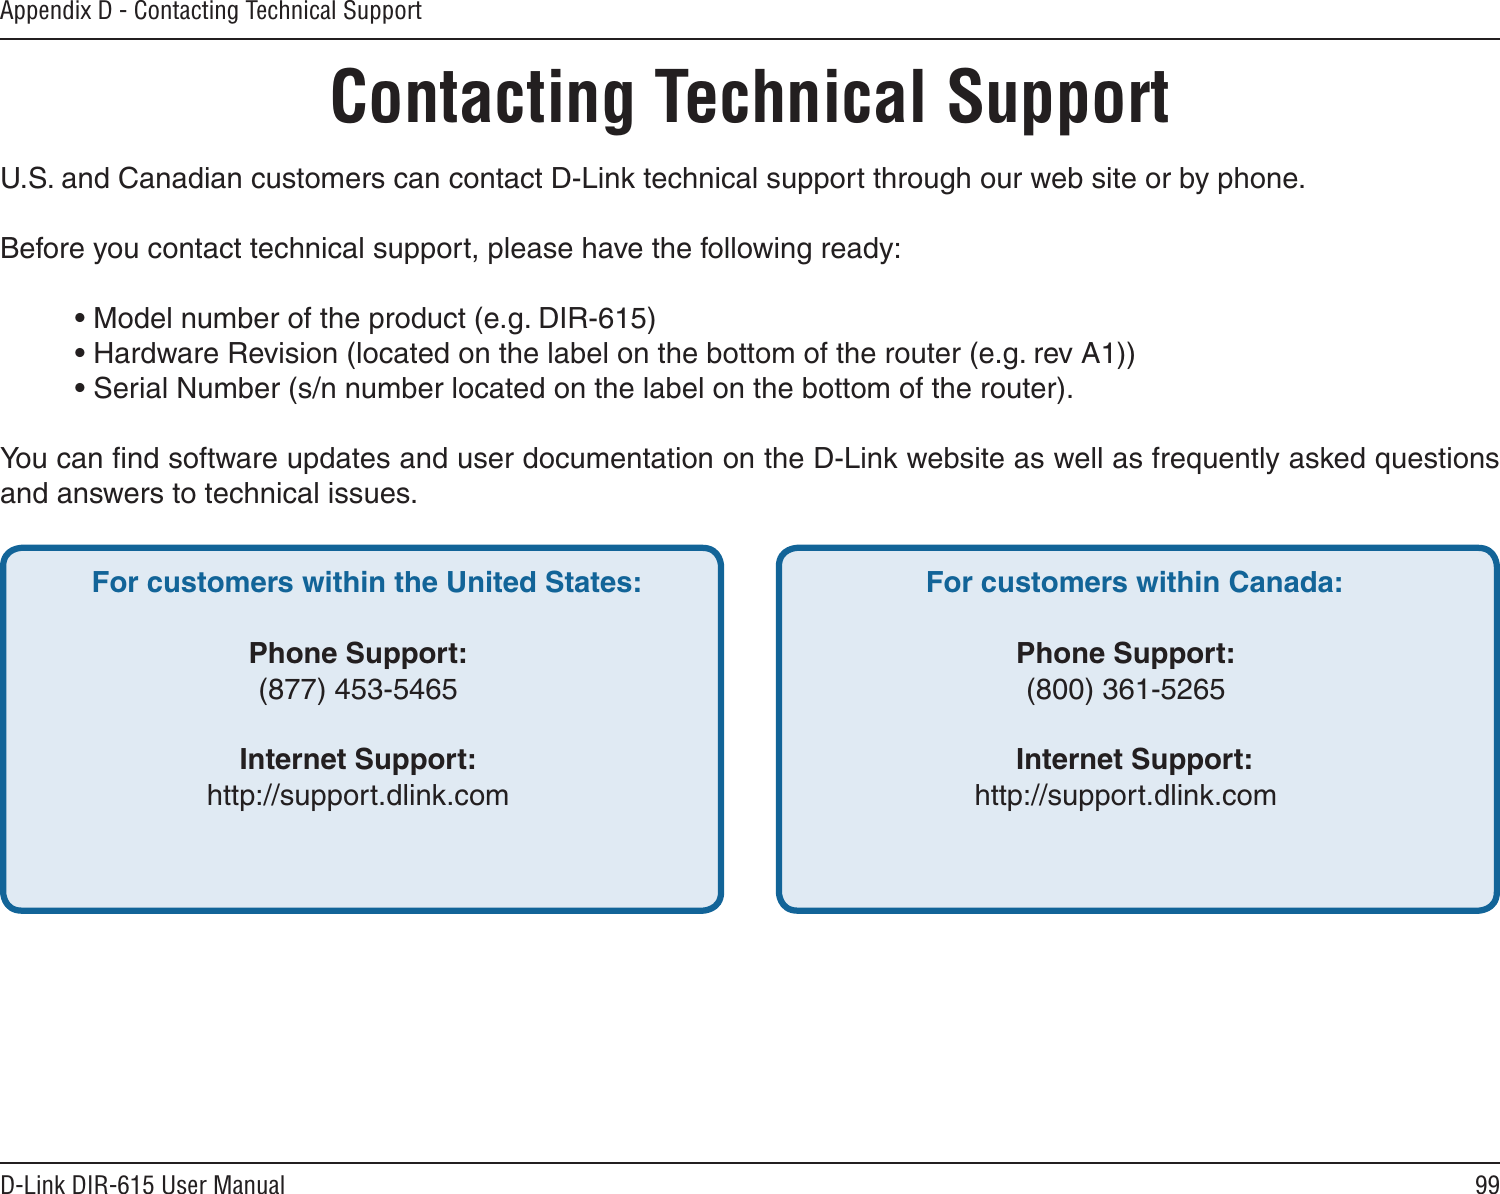 99D-Link DIR-615 User ManualAppendix D - Contacting Technical SupportContacting Technical SupportU.S. and Canadian customers can contact D-Link technical support through our web site or by phone.Before you contact technical support, please have the following ready:  • Model number of the product (e.g. DIR-615)  • Hardware Revision (located on the label on the bottom of the router (e.g. rev A1))  • Serial Number (s/n number located on the label on the bottom of the router). You can ﬁnd software updates and user documentation on the D-Link website as well as frequently asked questions and answers to technical issues.For customers within the United States: Phone Support:(877) 453-5465Internet Support:http://support.dlink.com For customers within Canada: Phone Support:(800) 361-5265 Internet Support:http://support.dlink.com